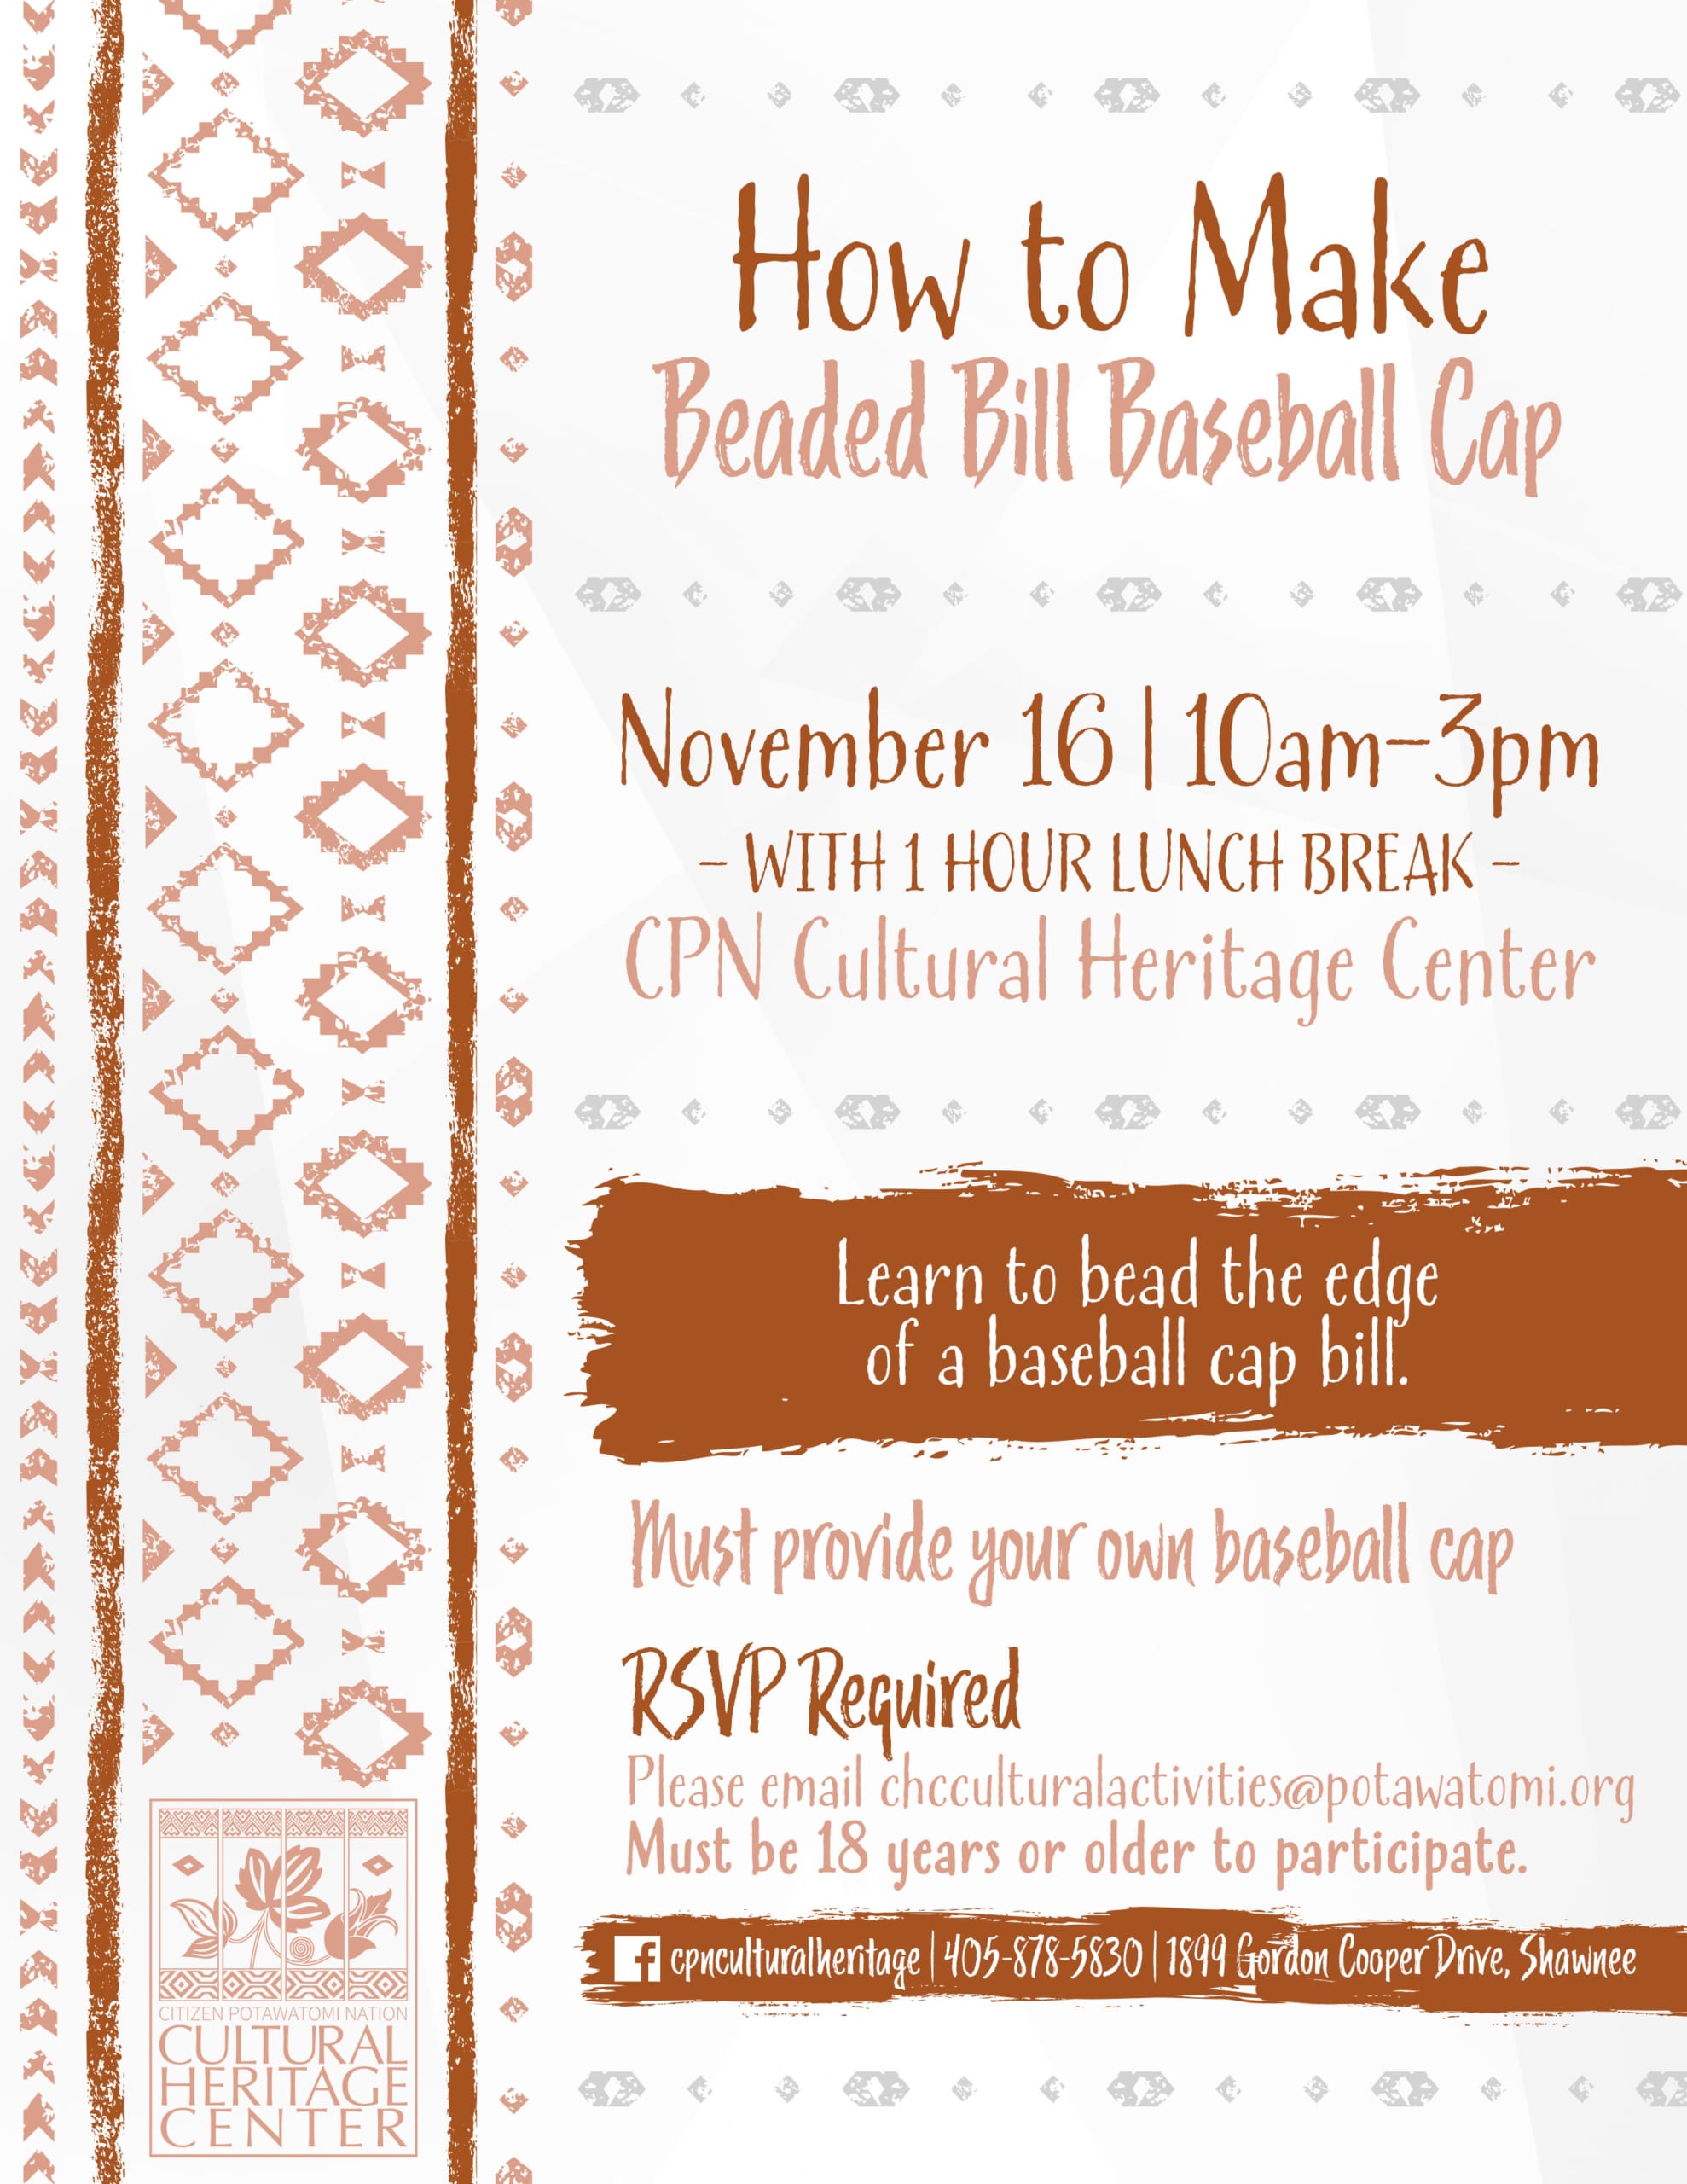 Burnt orange geometric designs frame event details for the November 16 class on making a beaded bill baseball cap at the CPN Cultural Heritage Center.